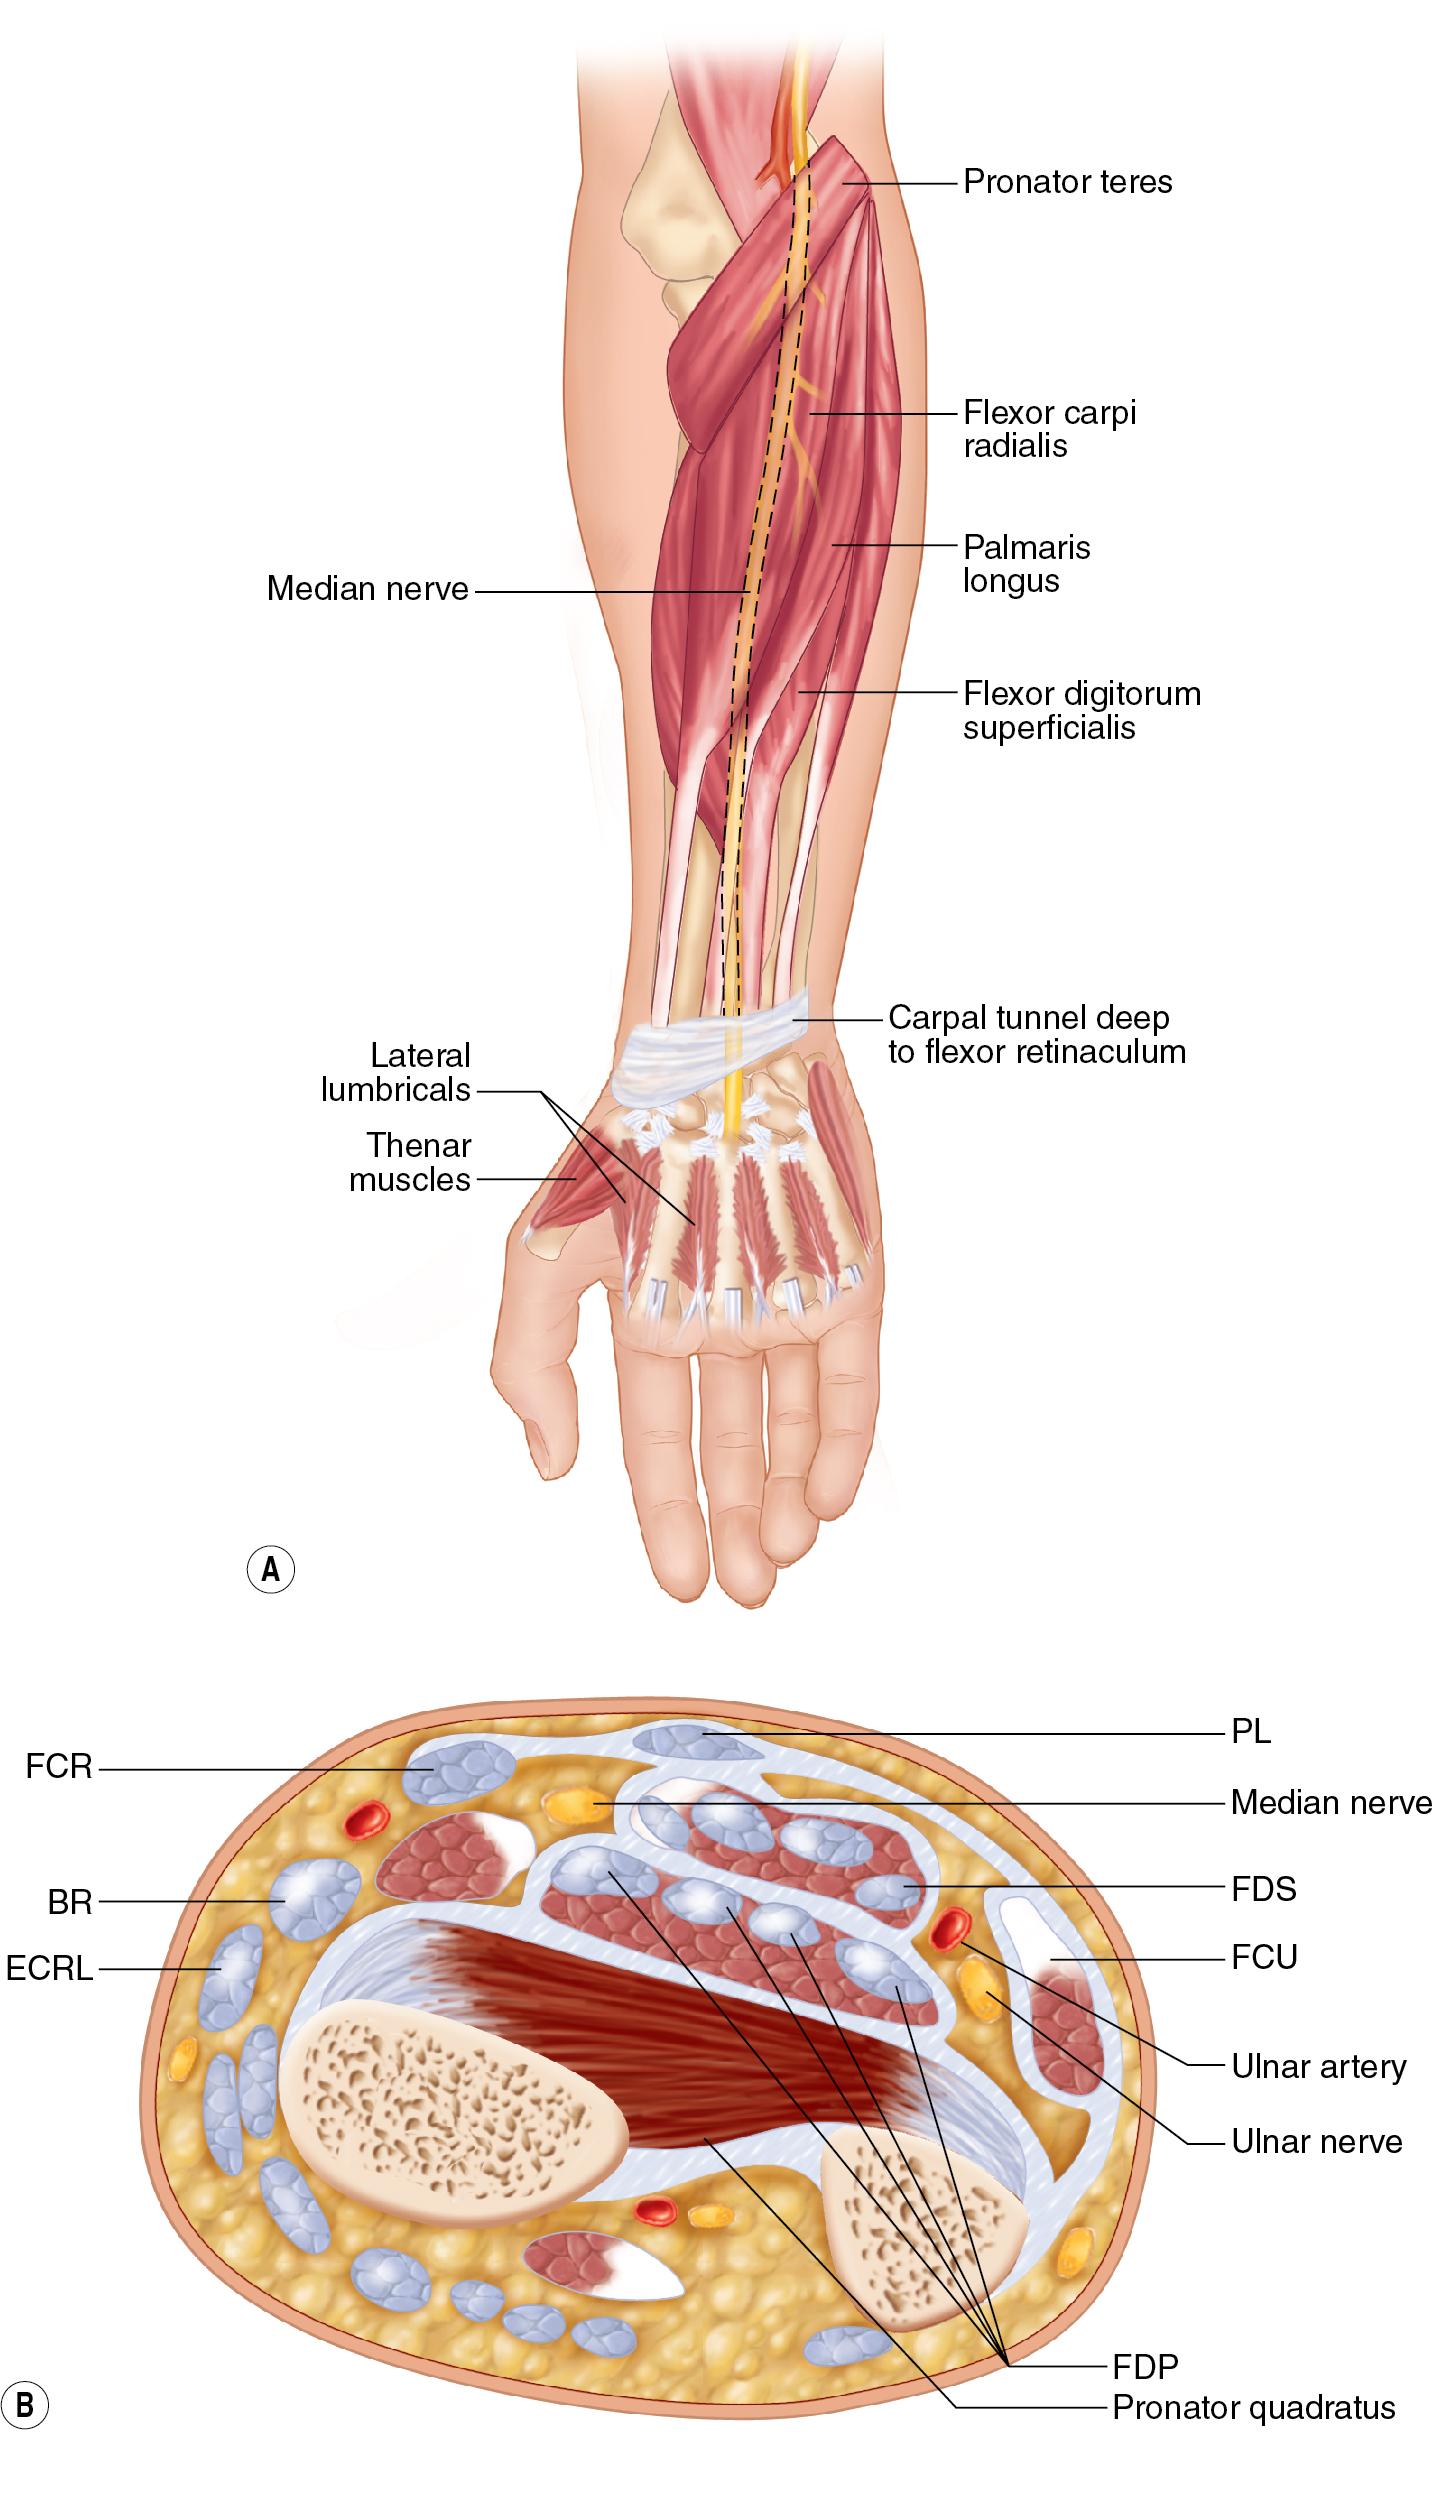 FIGURE 64.1, Patients with high median nerve injuries suffer denervation of the abductor pollicis brevis (APB), the opponens pollicis, the superficial (radial) head of the flexor pollicis brevis (FPB), the radial two lumbricals, the flexor pollicis longus (FPL), the index and long finger flexor digitorum profundus (FDP), the flexor digitorum superficialis (FDS) to all fingers, the flexor-pronator group (pronator teres, flexor carpi radialis [FCR]), the palmaris longus (PL), and the pronator quadratus (PQ).